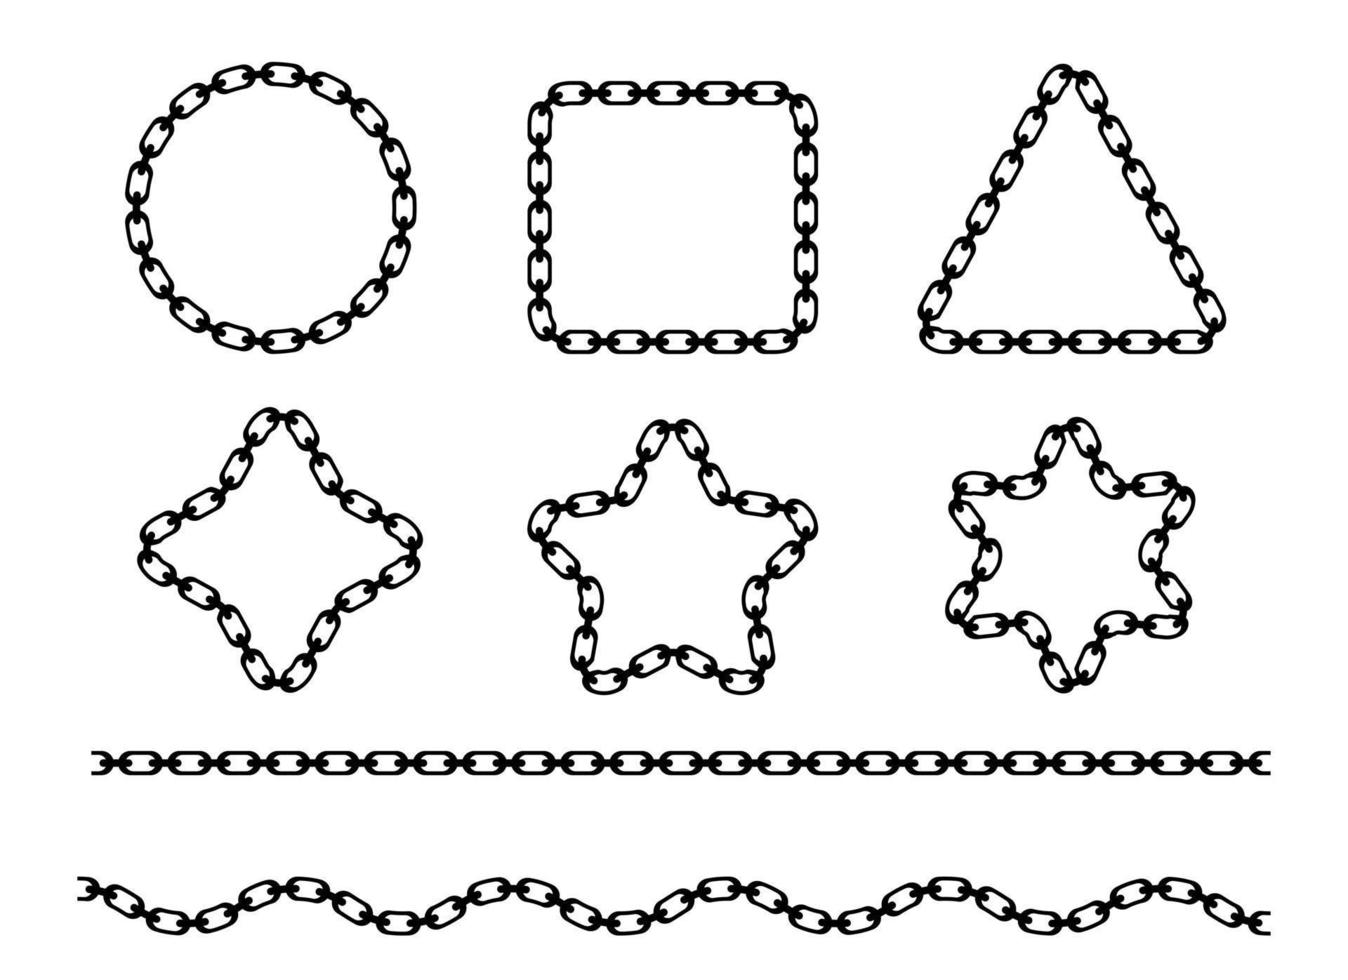 Chain vector design illustration isolated on white background